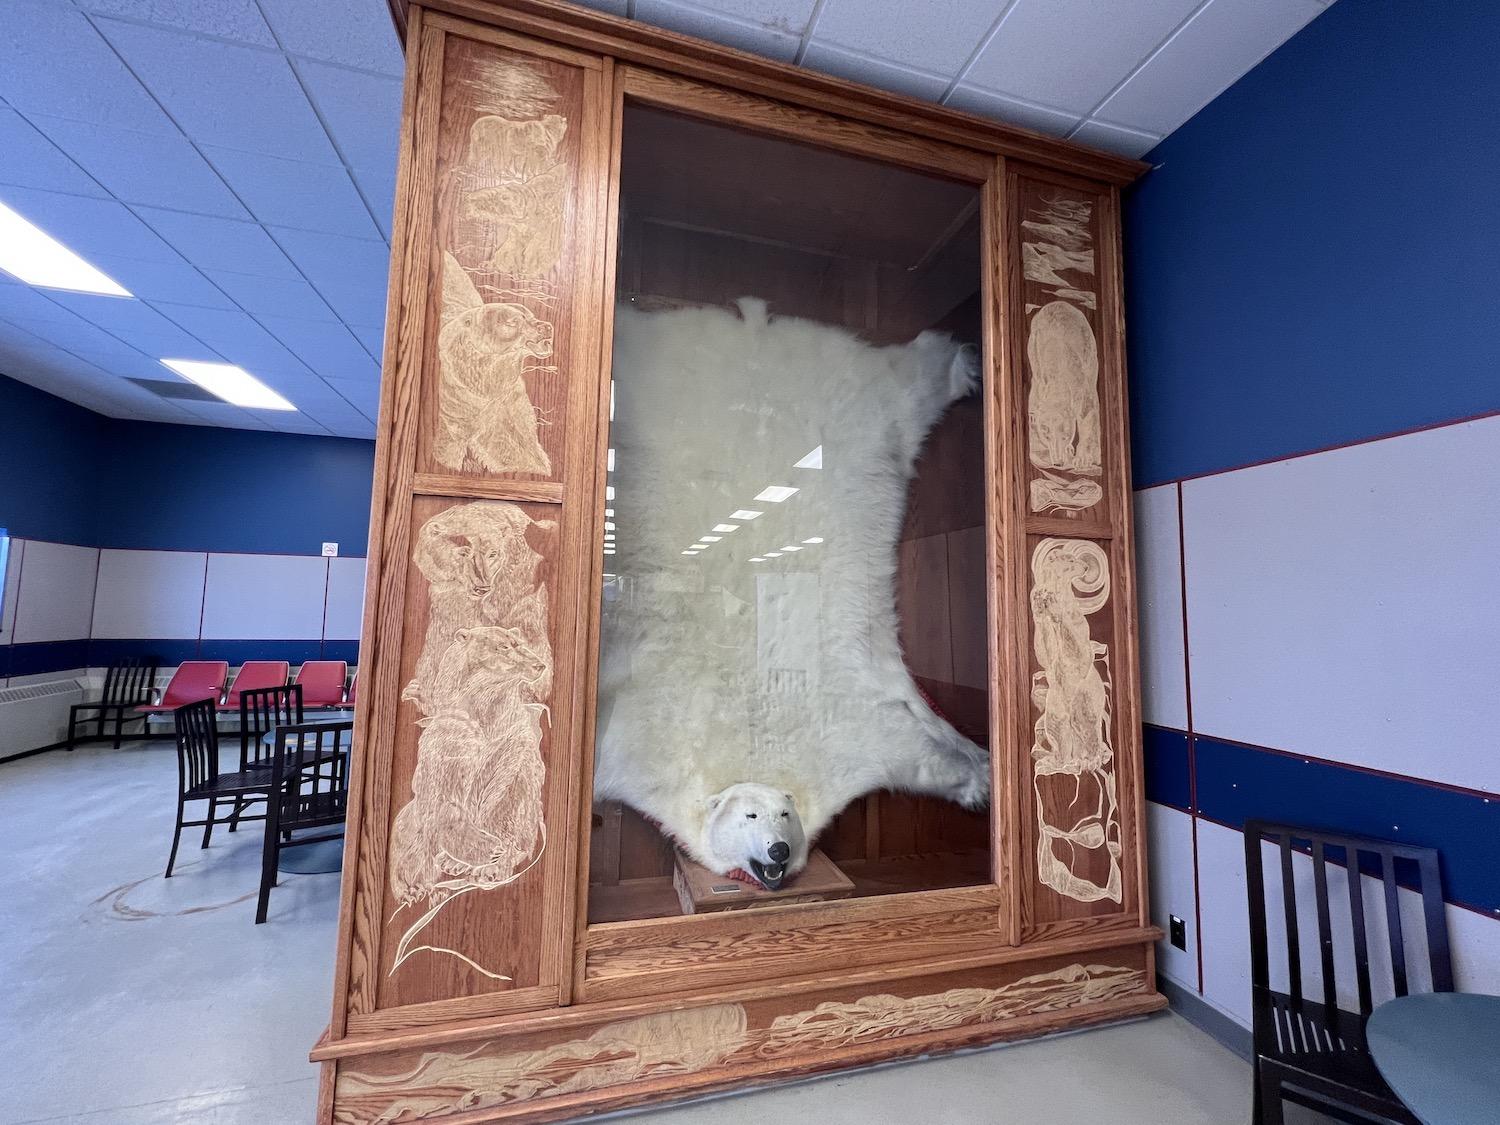 In Churchill Airport, don't miss the polar bear display credited to Inuit hunter Larry White, cabinetmaker Edgar Botelho and artist Donna McPherson.